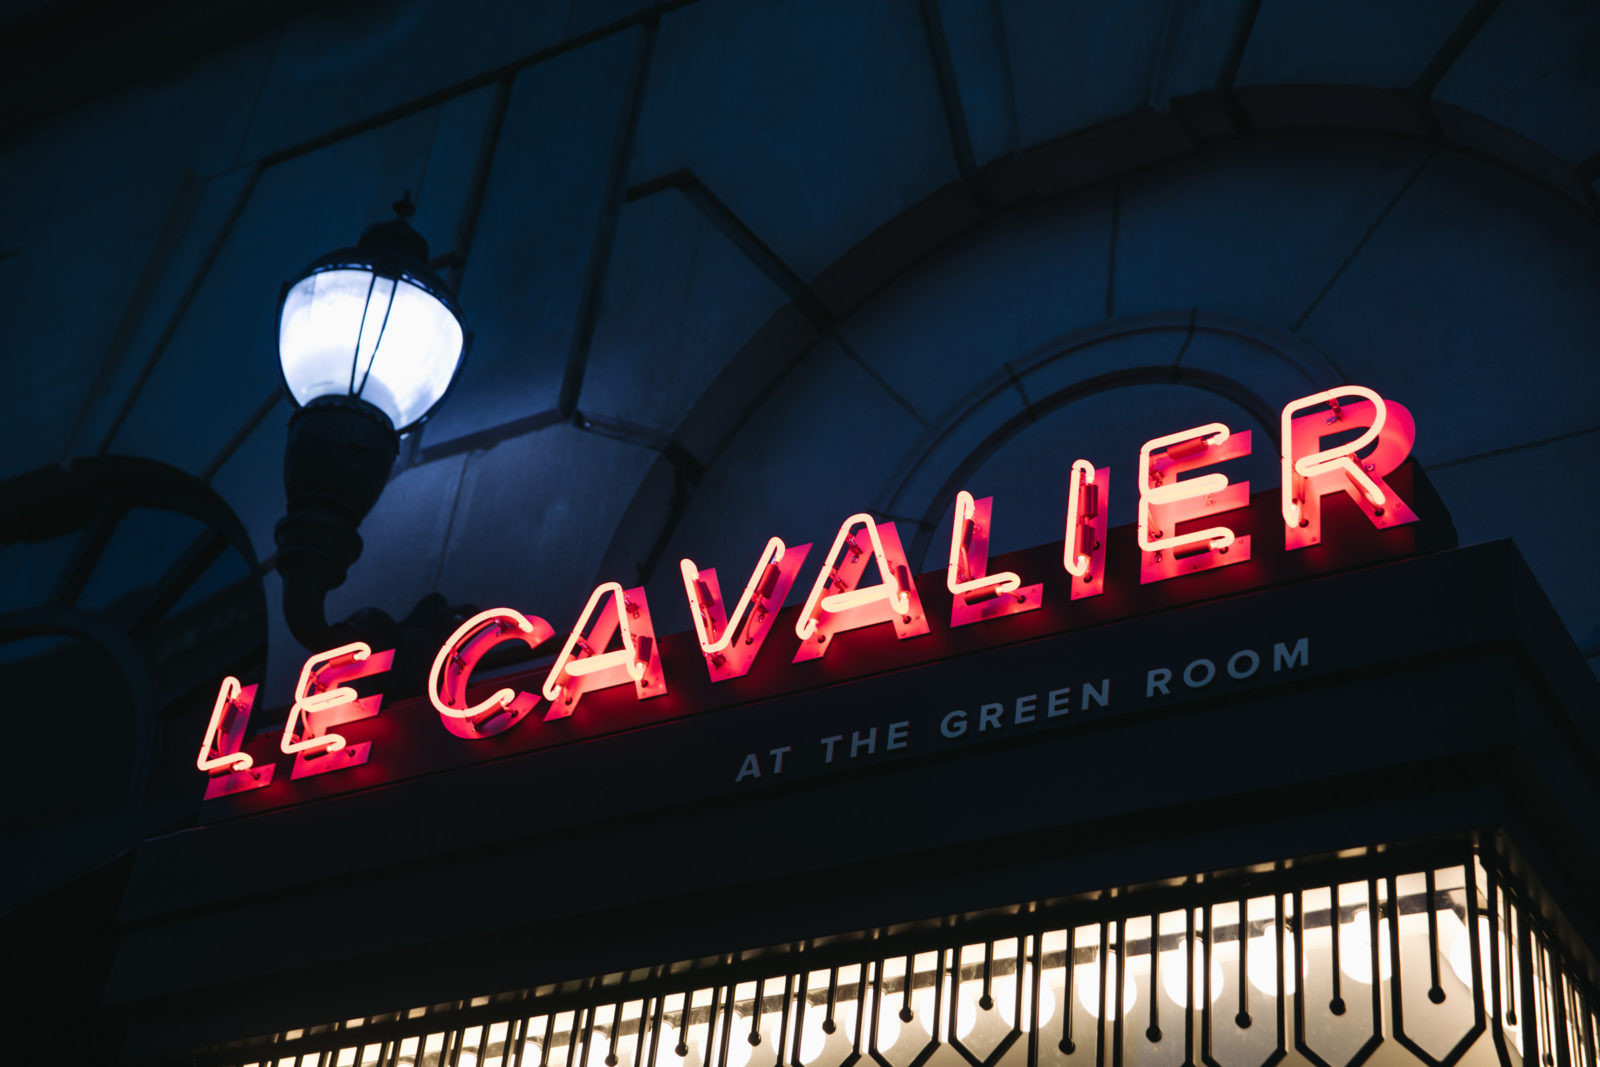 Le Cavalier sign at HOTEL DUPONT